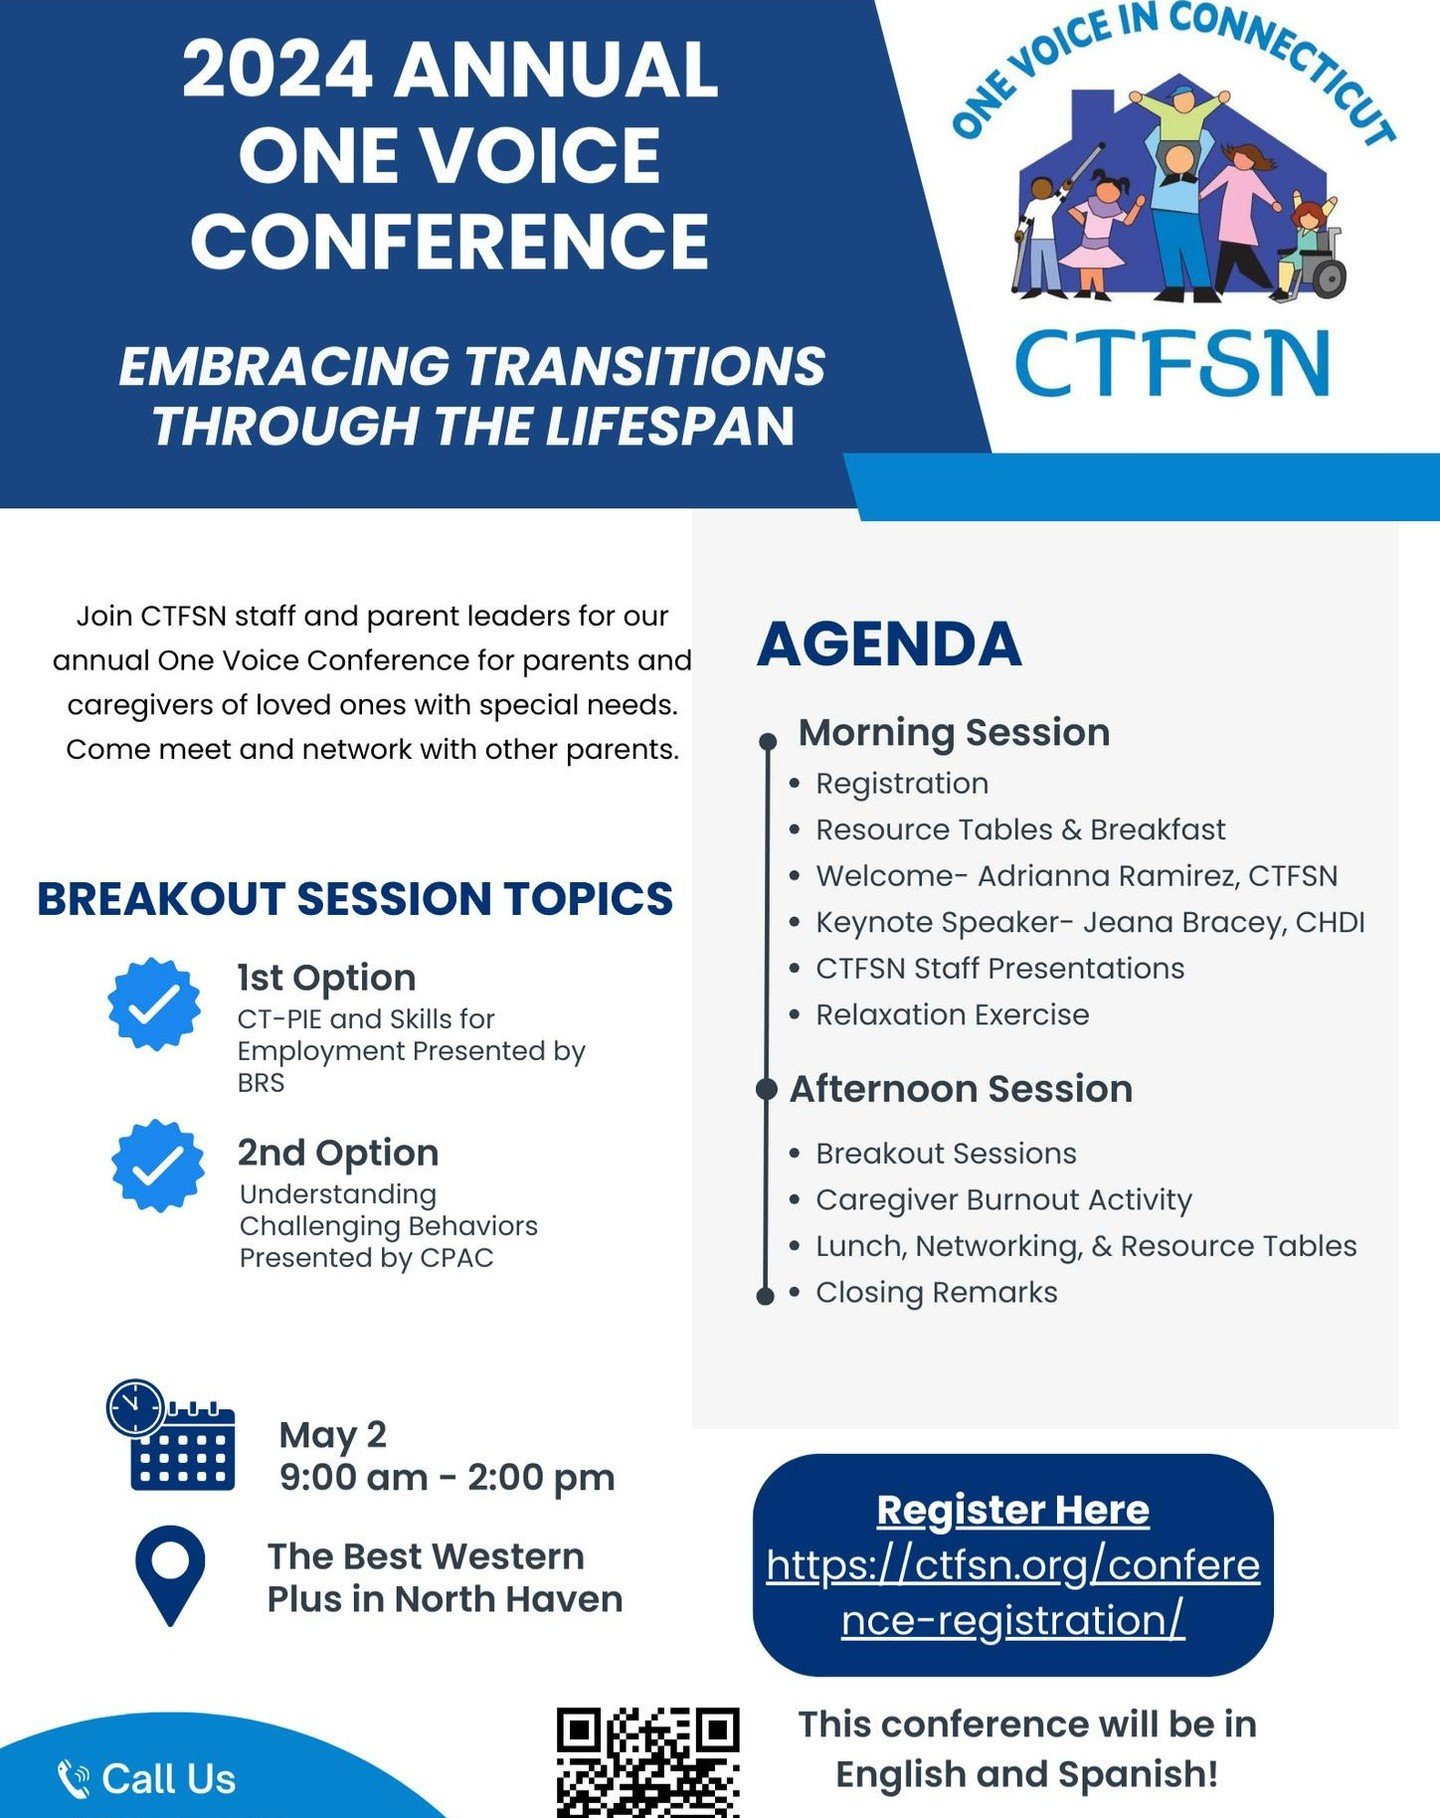 @ctfsn is hosting their Annual One Voice Conference on May 2nd from 9:00 am- 2:00 pm at The Best Western Plus in North Haven. We hope to see you there!